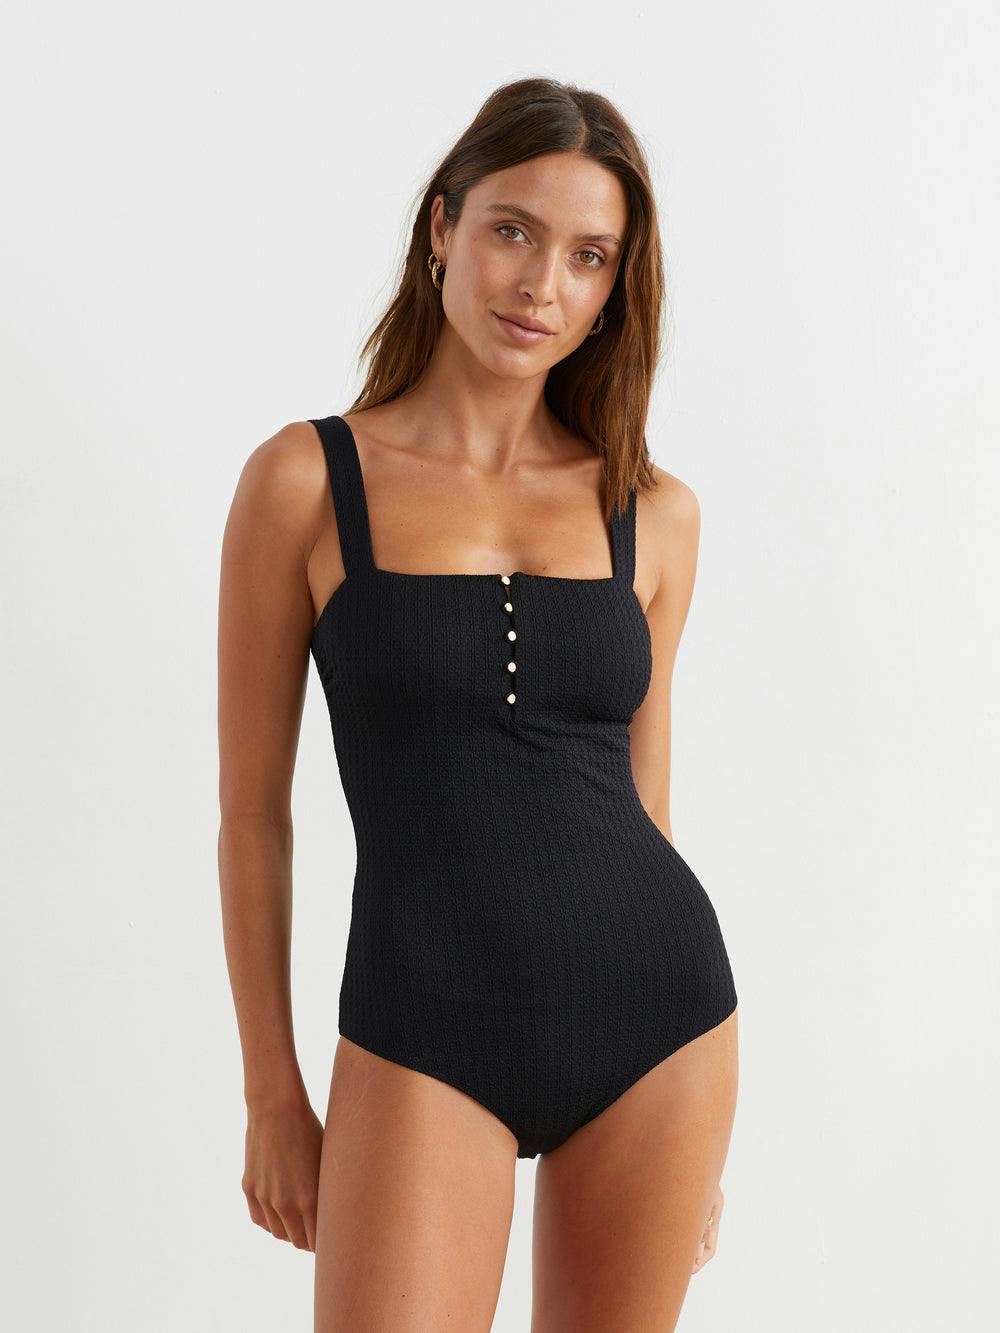 ra zoe one piece, a product by Boteh